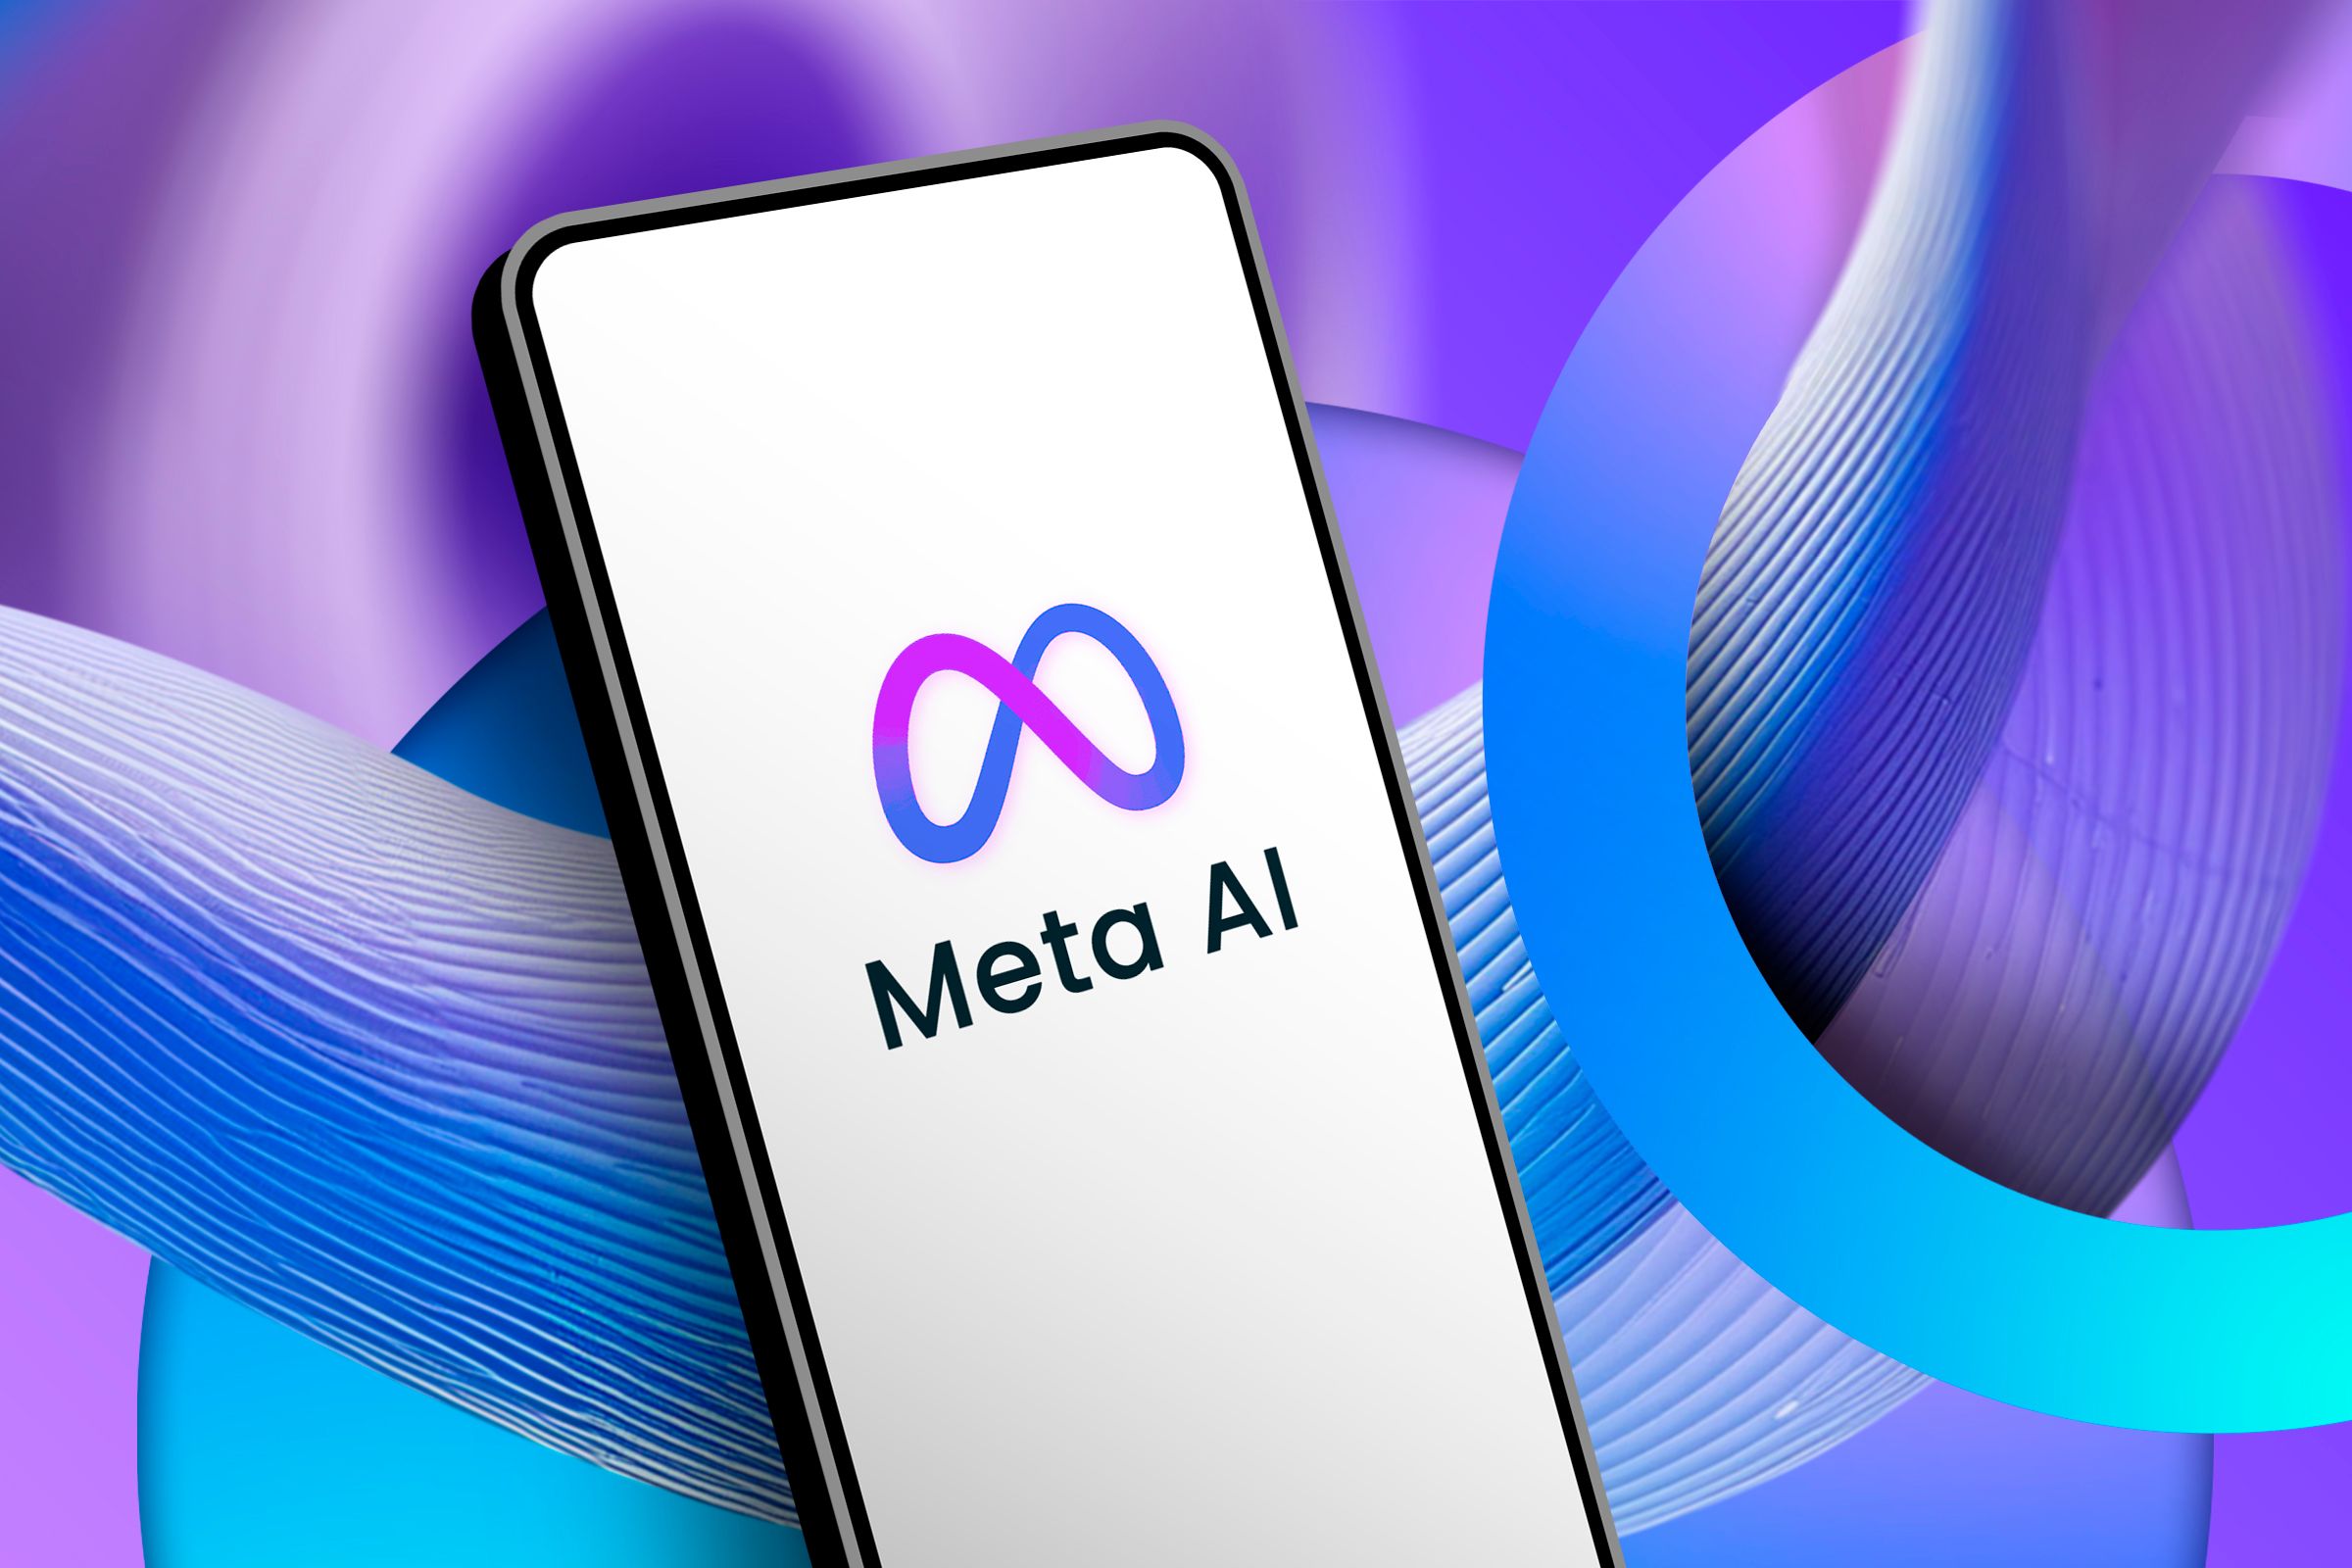 A Phone with Meta logo on its screen.